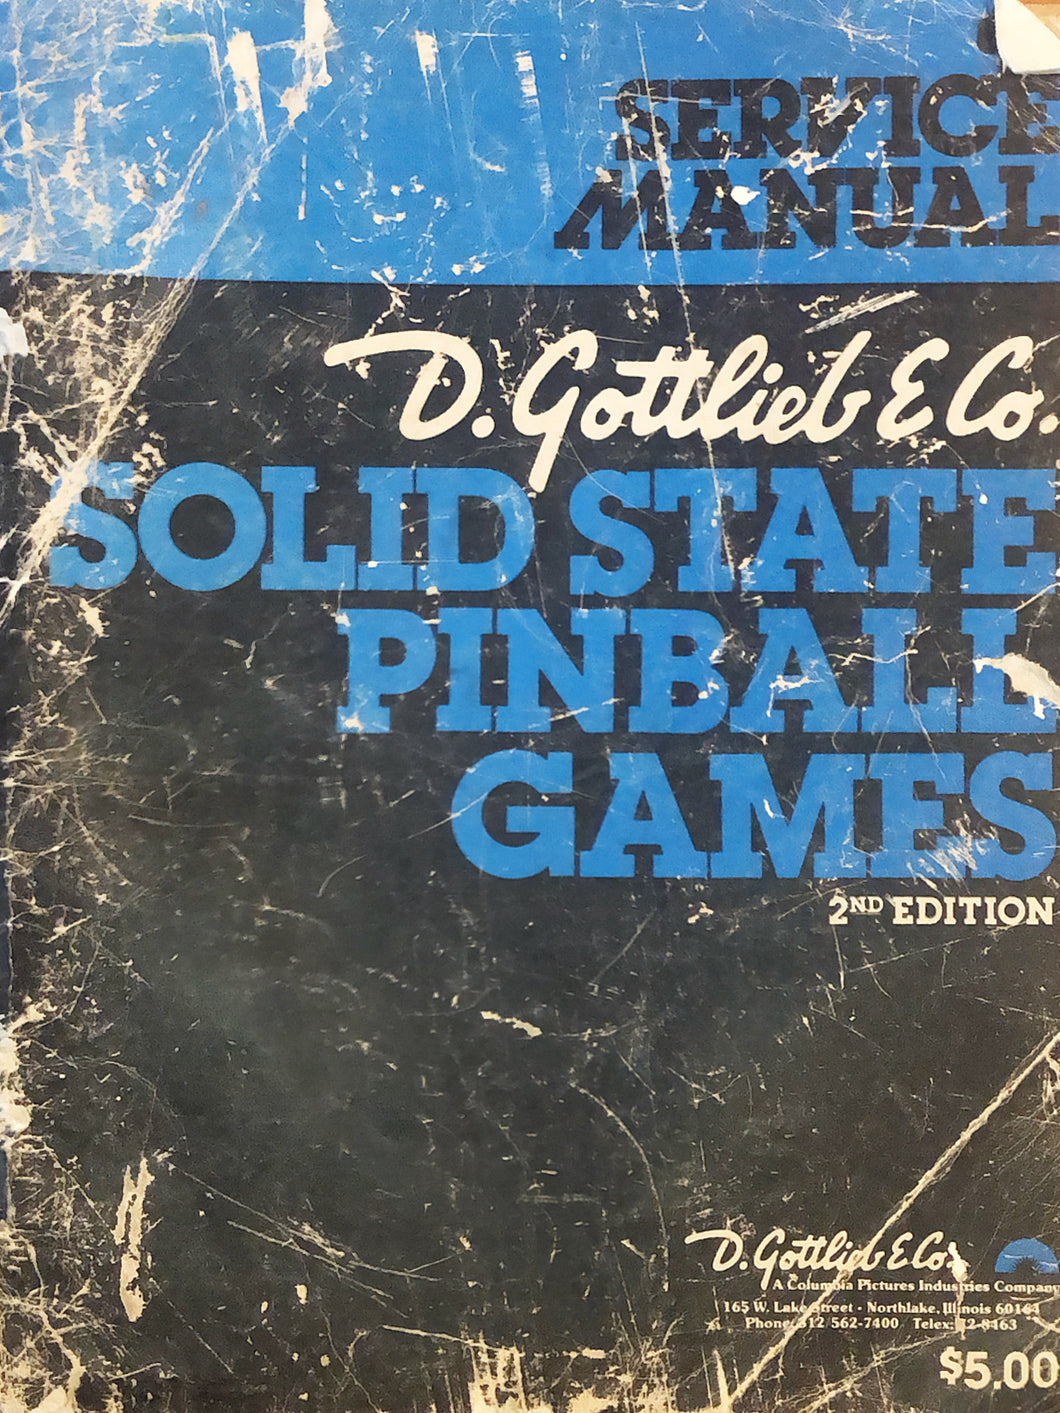 Solid Stage Pinball Games Service Manual